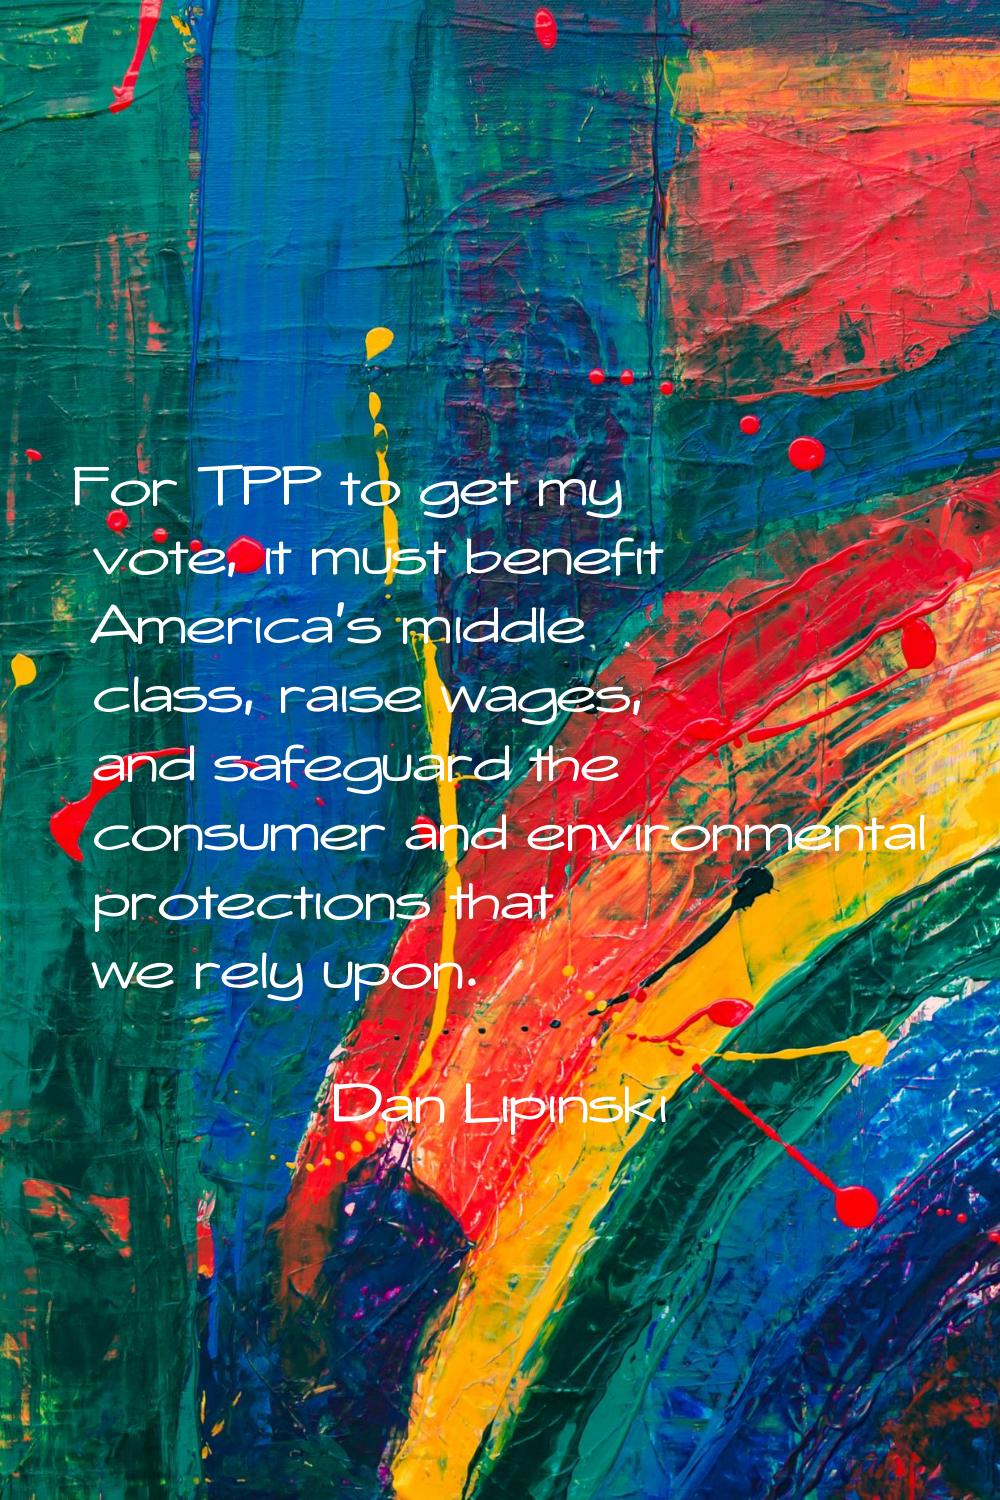 For TPP to get my vote, it must benefit America's middle class, raise wages, and safeguard the cons